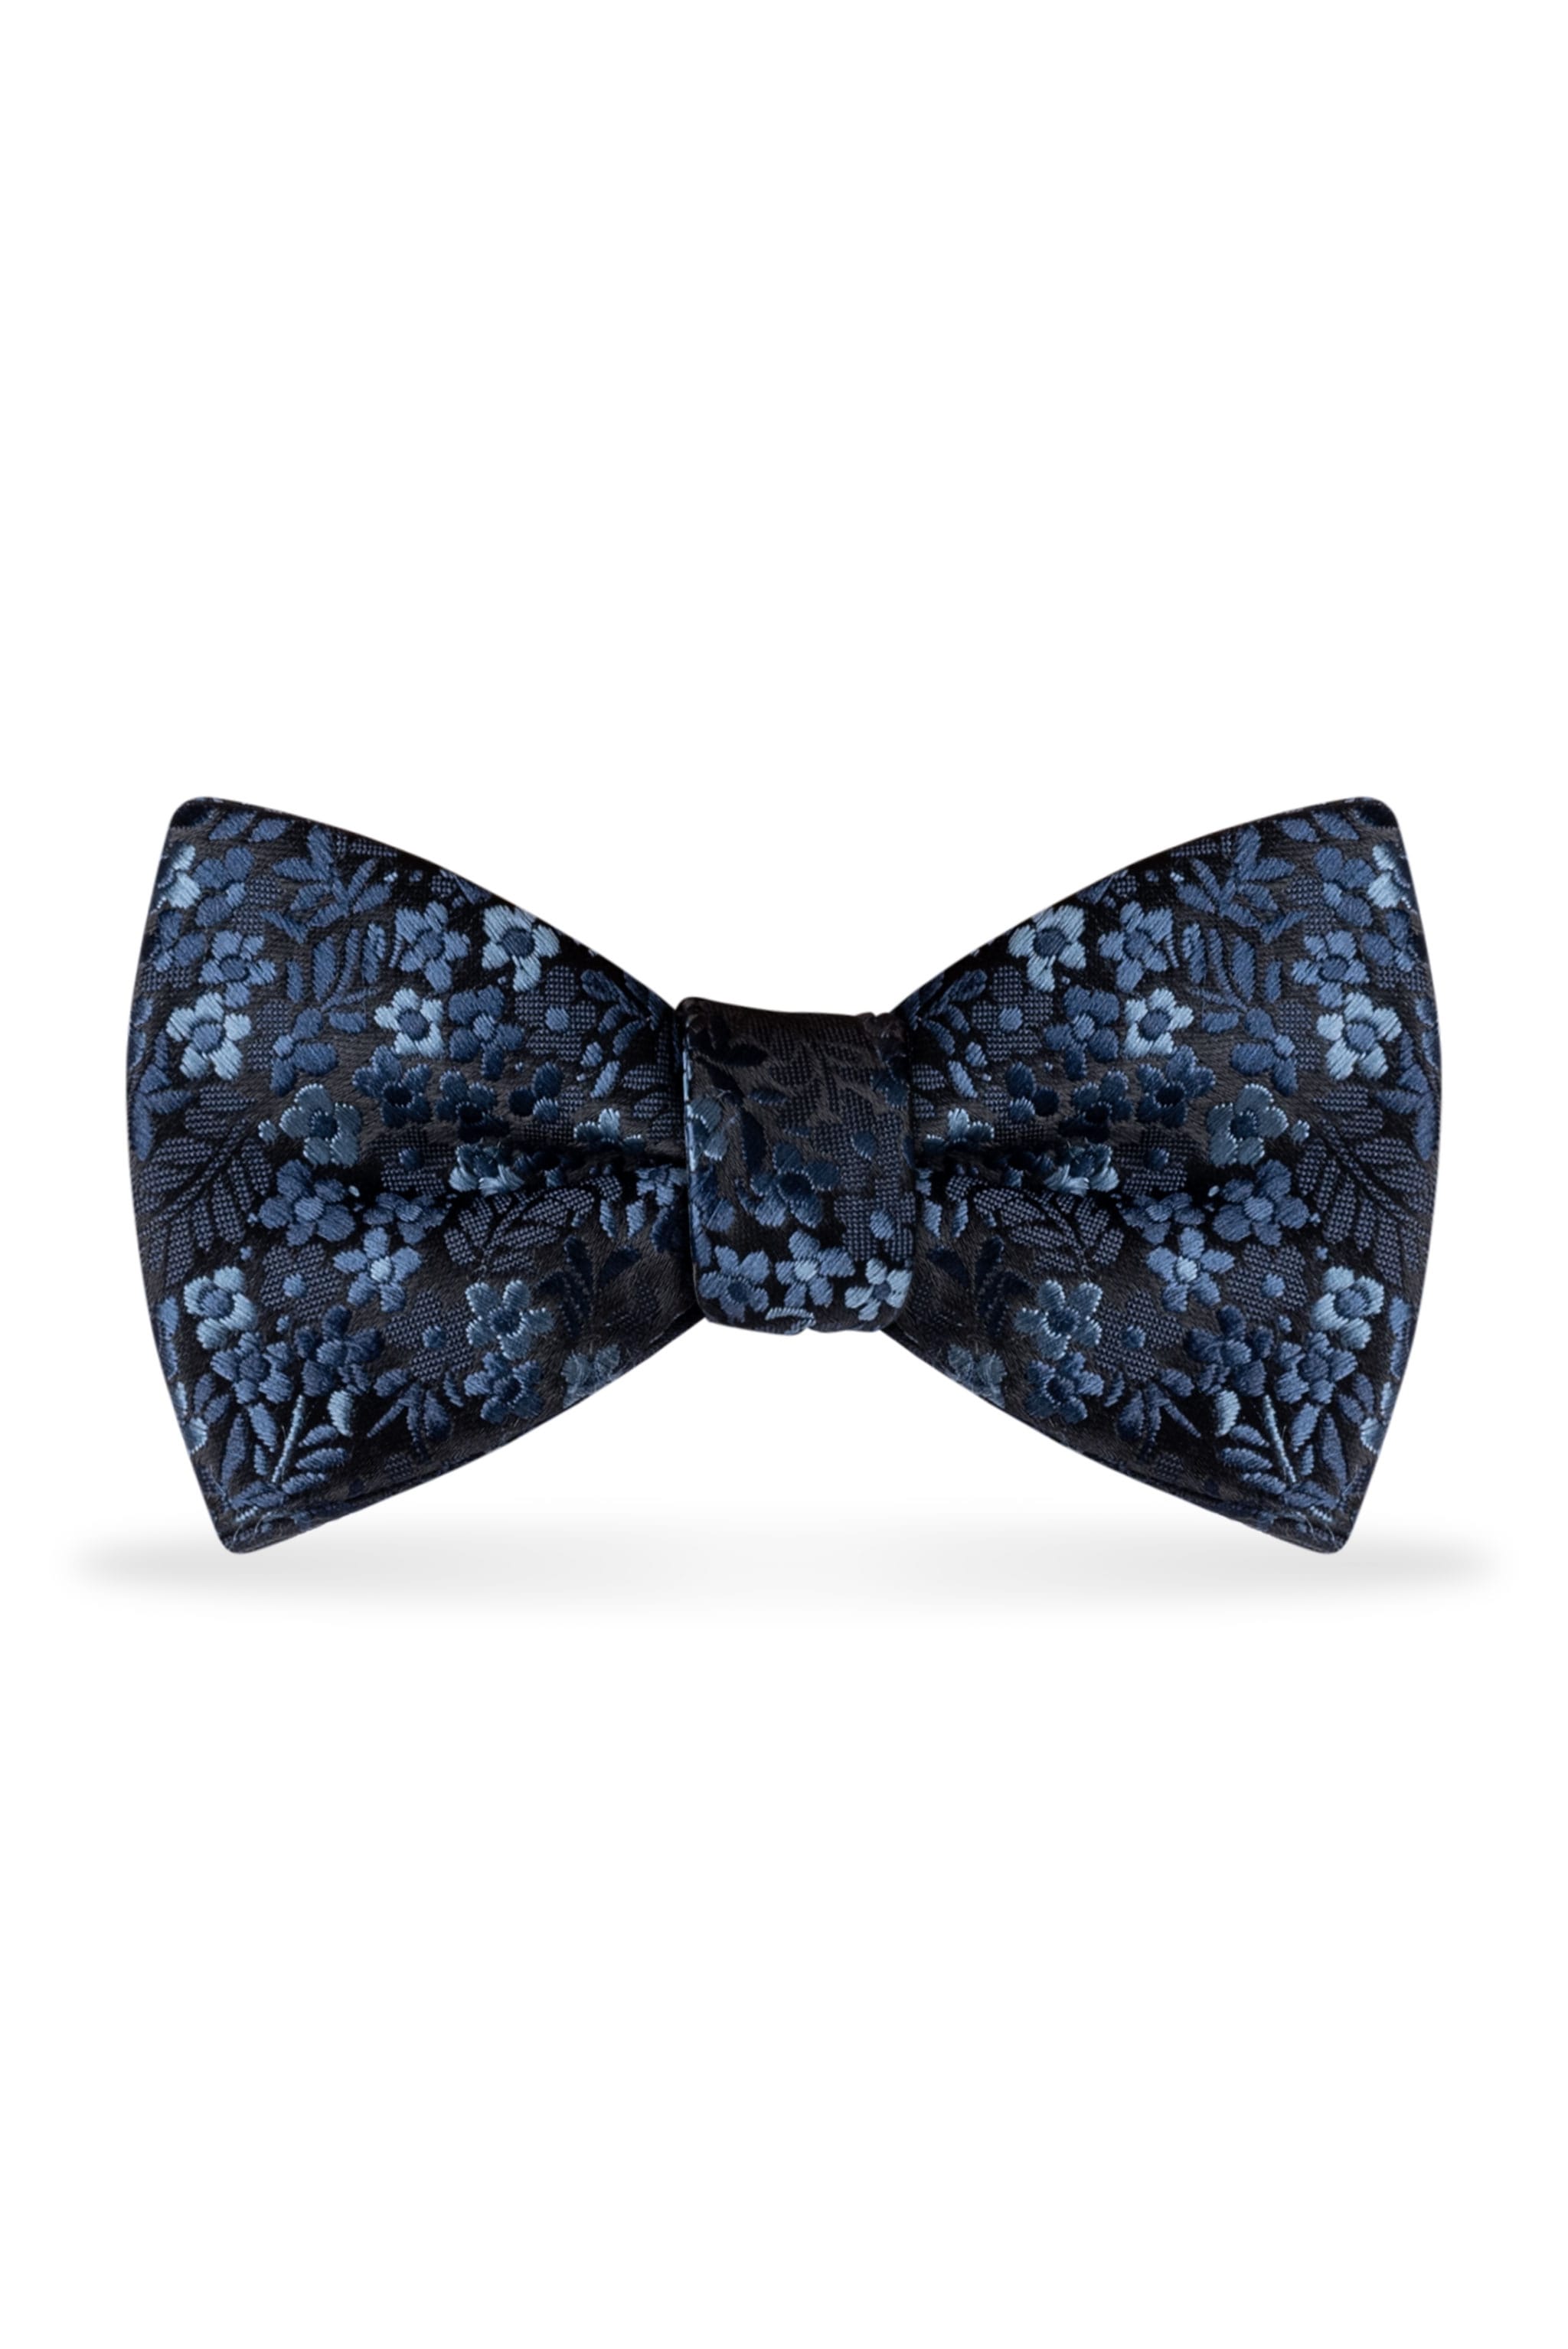 Floral Navy Bow Tie